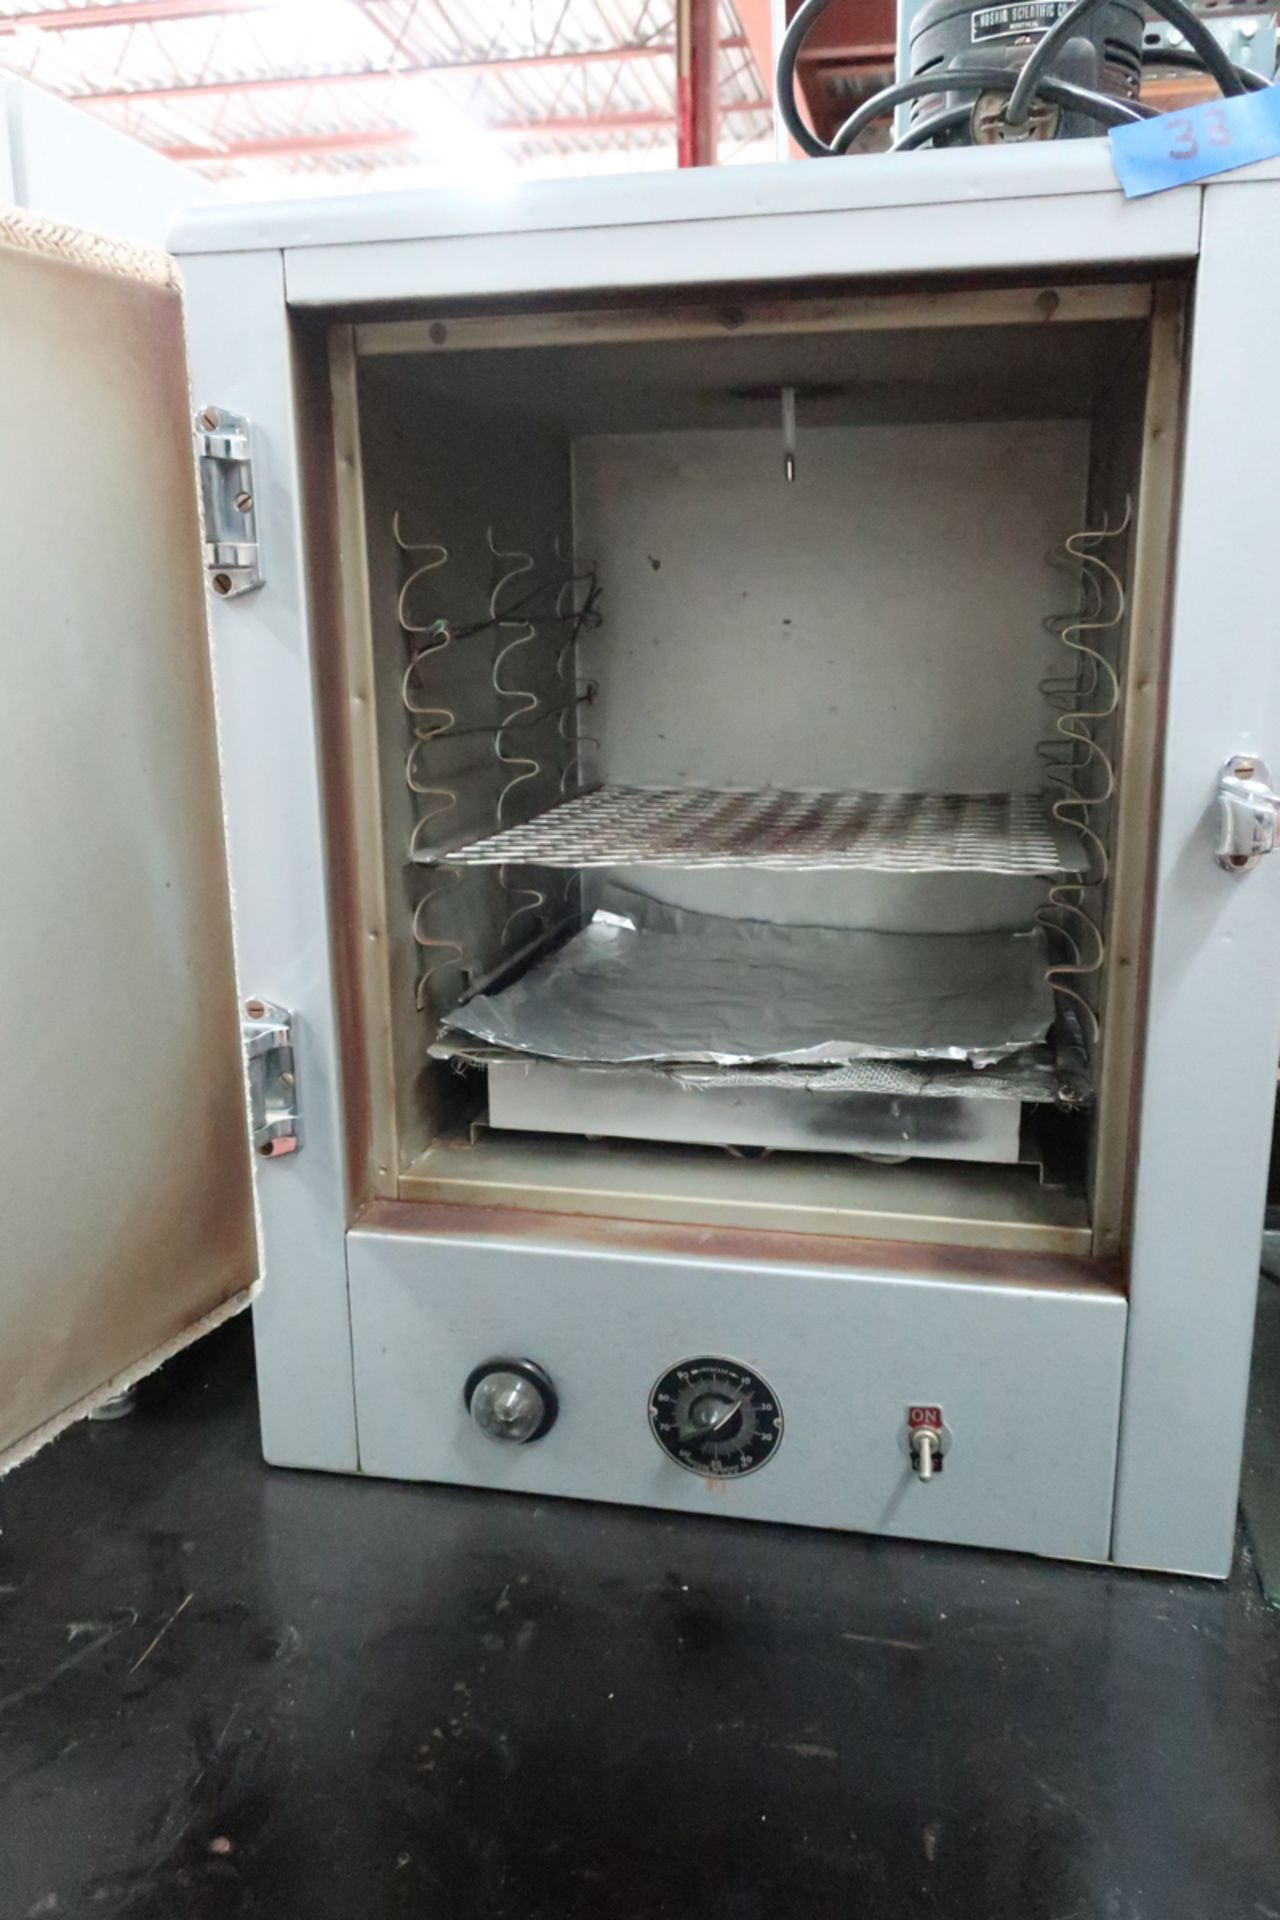 Thelco oven 115 V. 180° C #31477 - Image 3 of 5